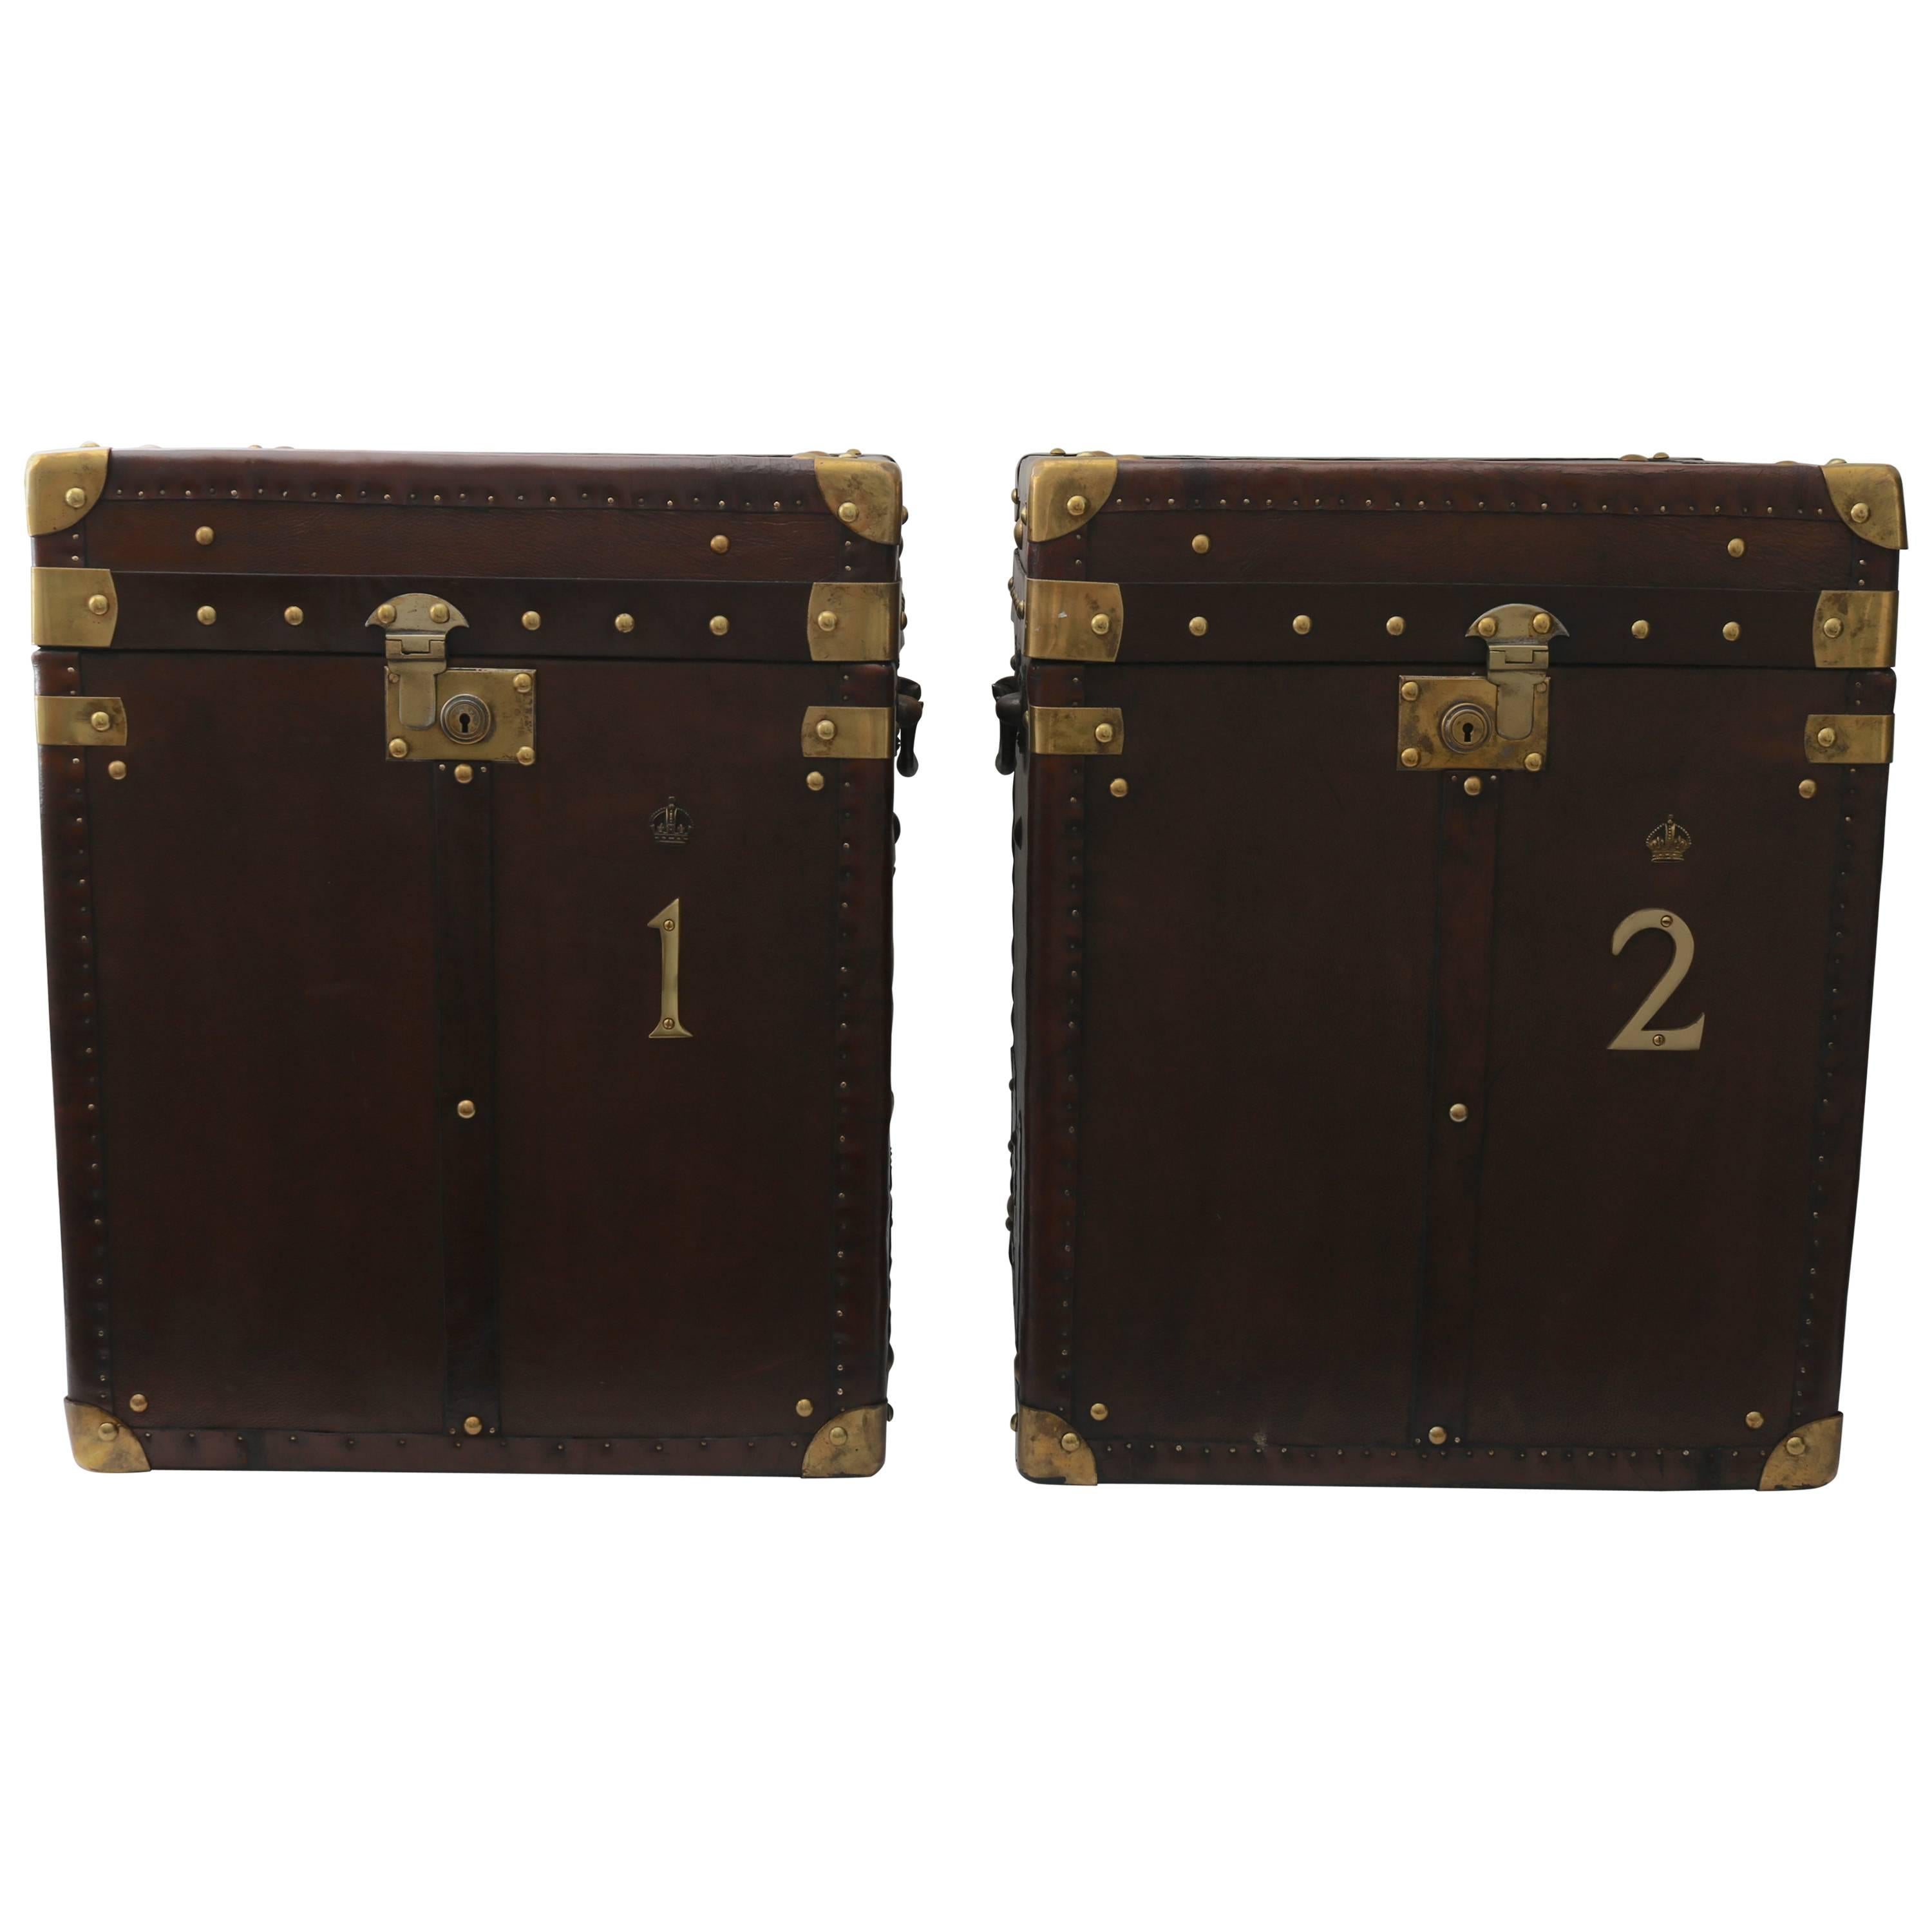 Pair of English Trunks in Leather with Brass Mounts